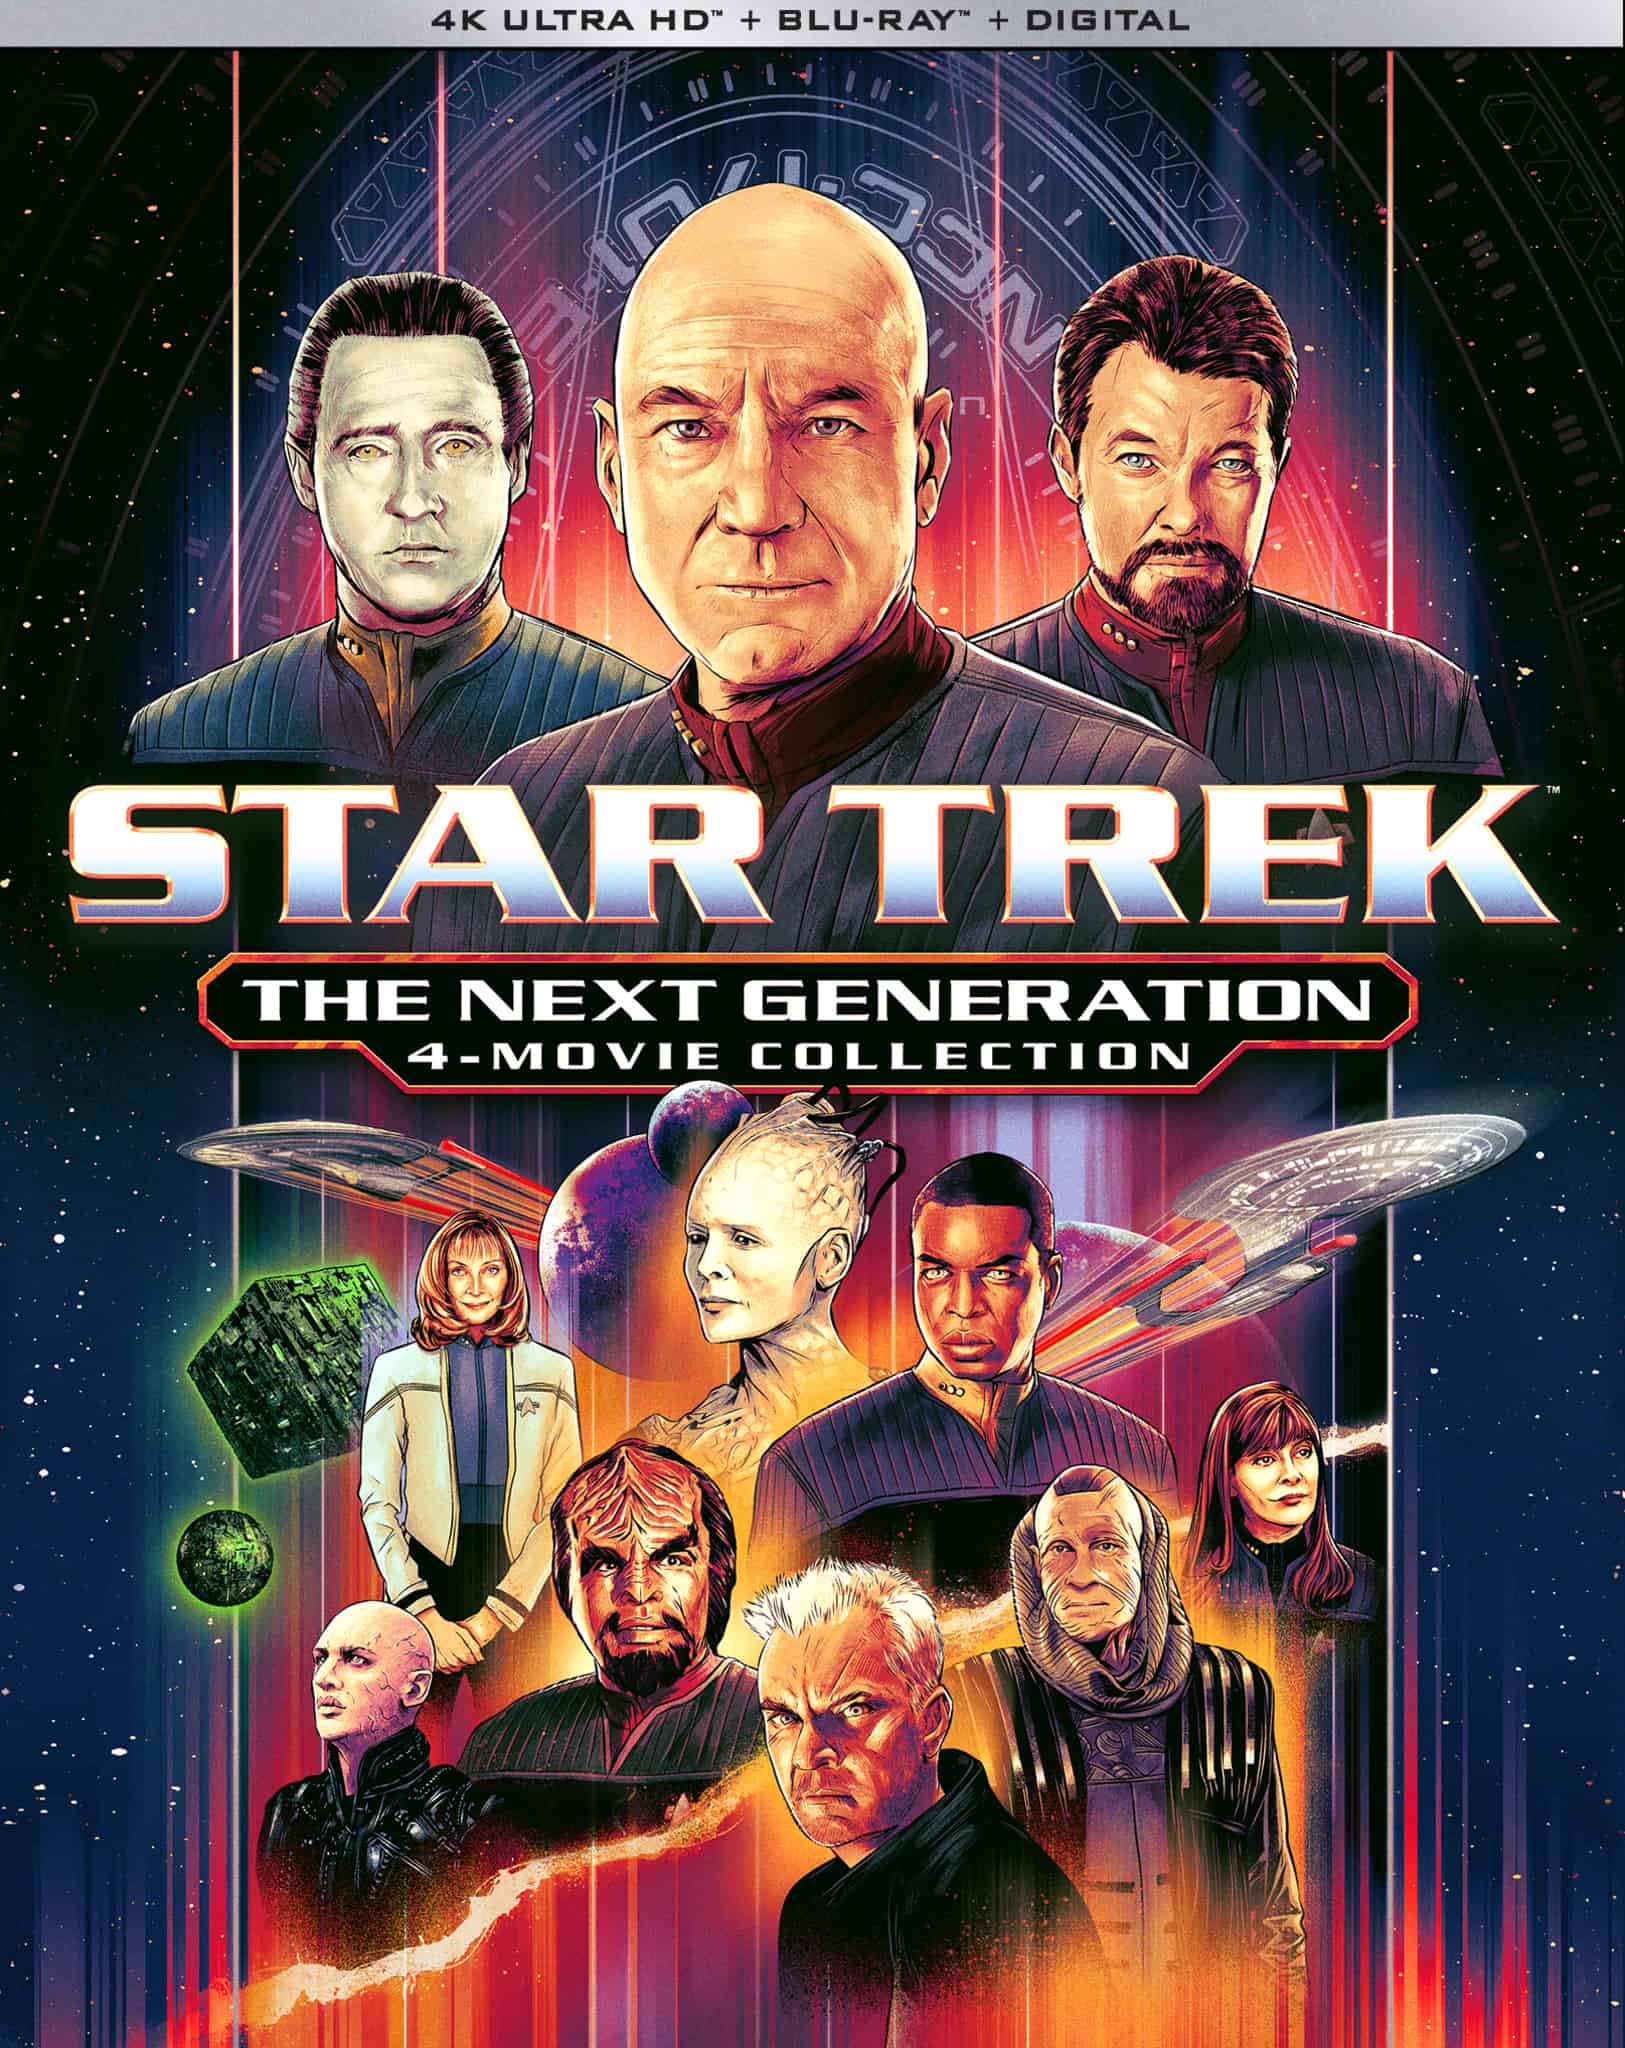 Star Trek: The Next Generation Movies come to 4K UHD on April 4th 19